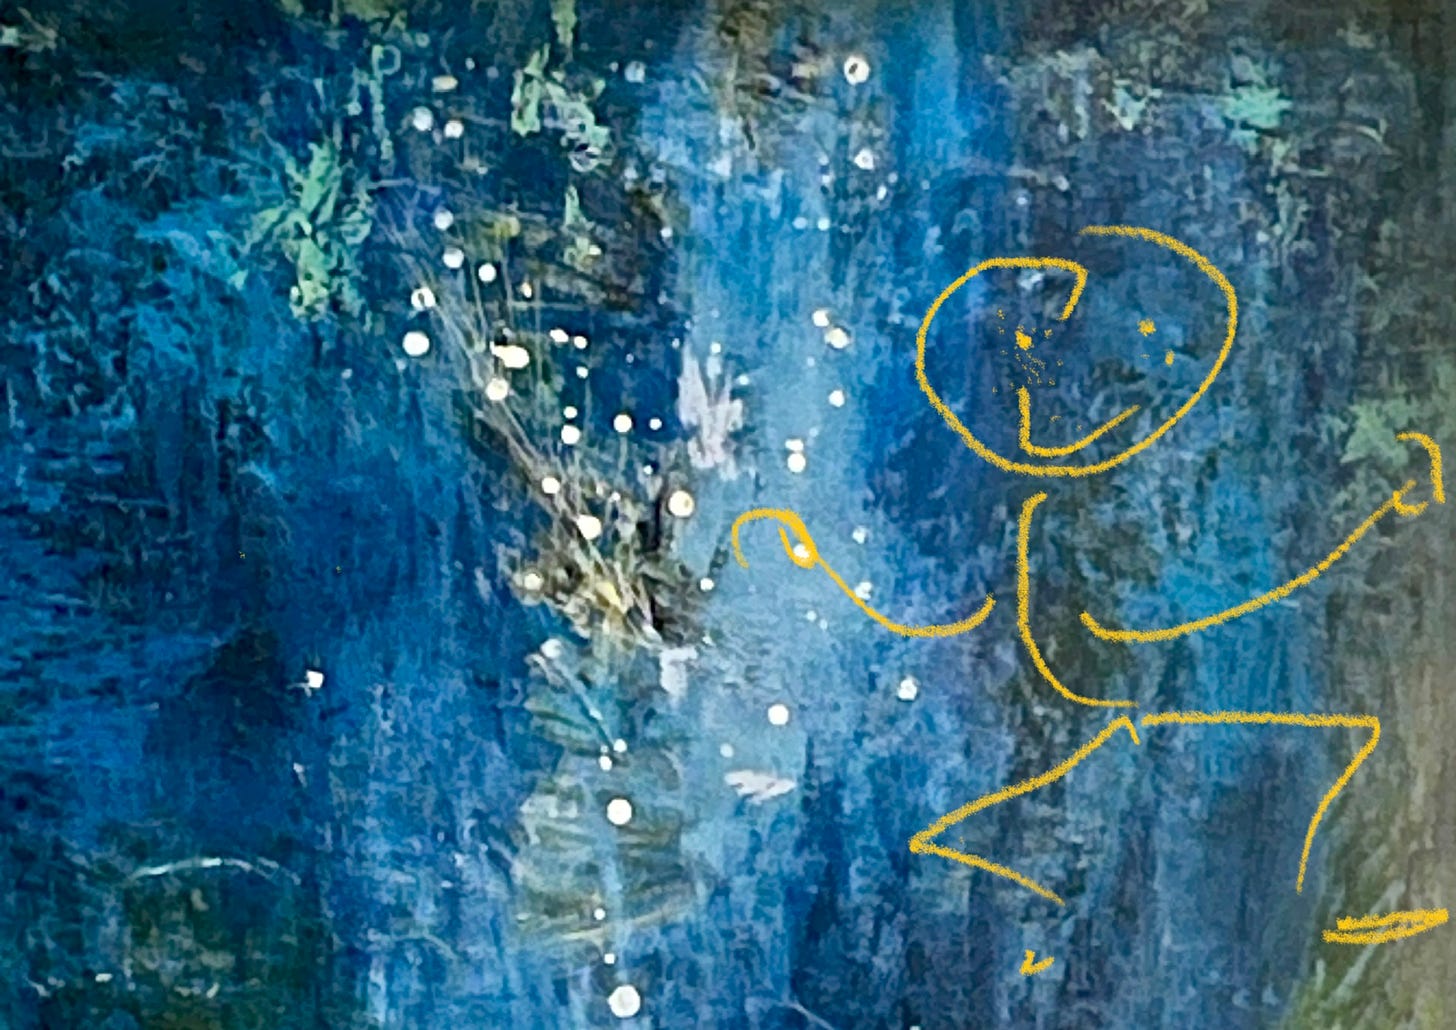 Whimsical yellow stick figure representing M.A. Hastings dancing in the midst of a galaxy of white stars against a deep blue and turquoise sky.  Her legs are bowed outward and bent at the knees. Both arms are extended out from her curved torso and slightly bent in an upwards dance move.  The broad grin on her face reflects joy as she dances among the stars.